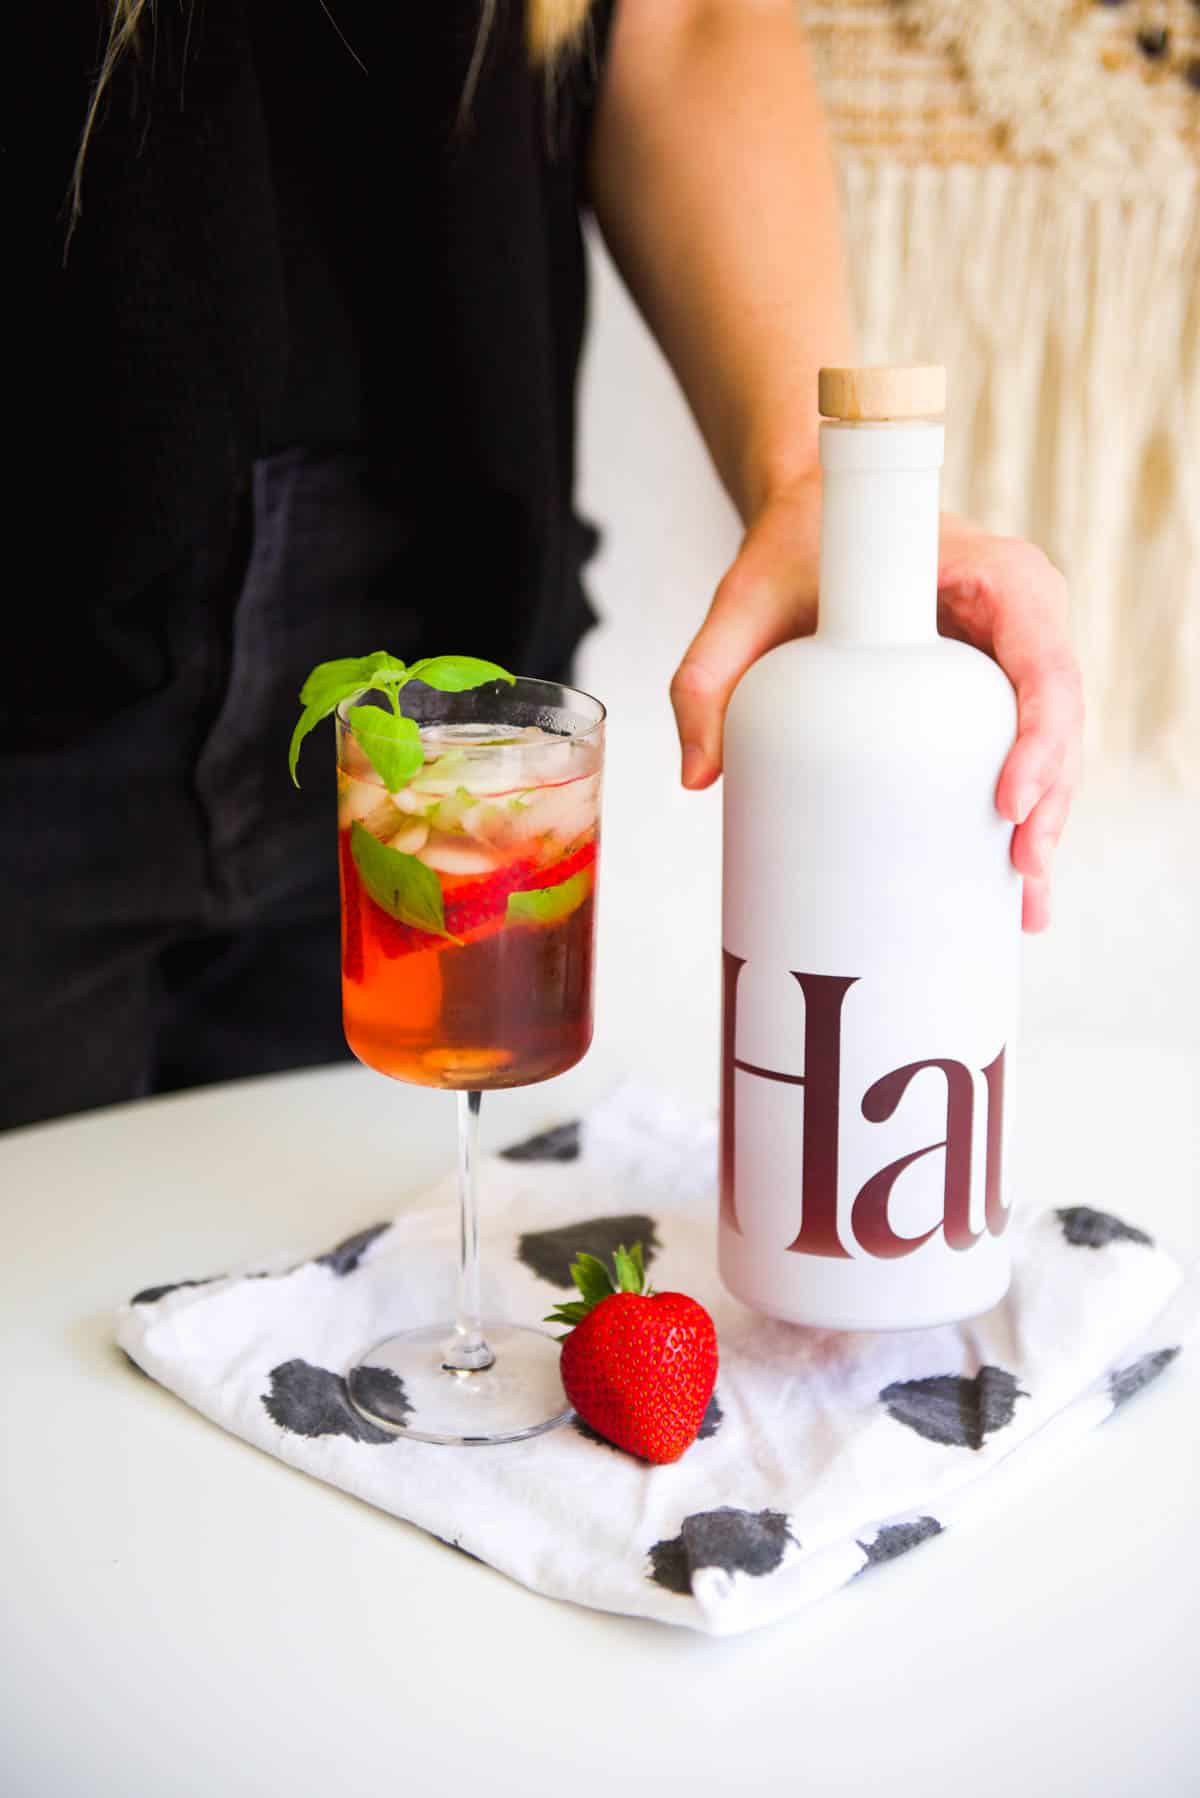 A wine glass holding a cocktail on a table and a woman setting a bottle of Haus on the table next to it.